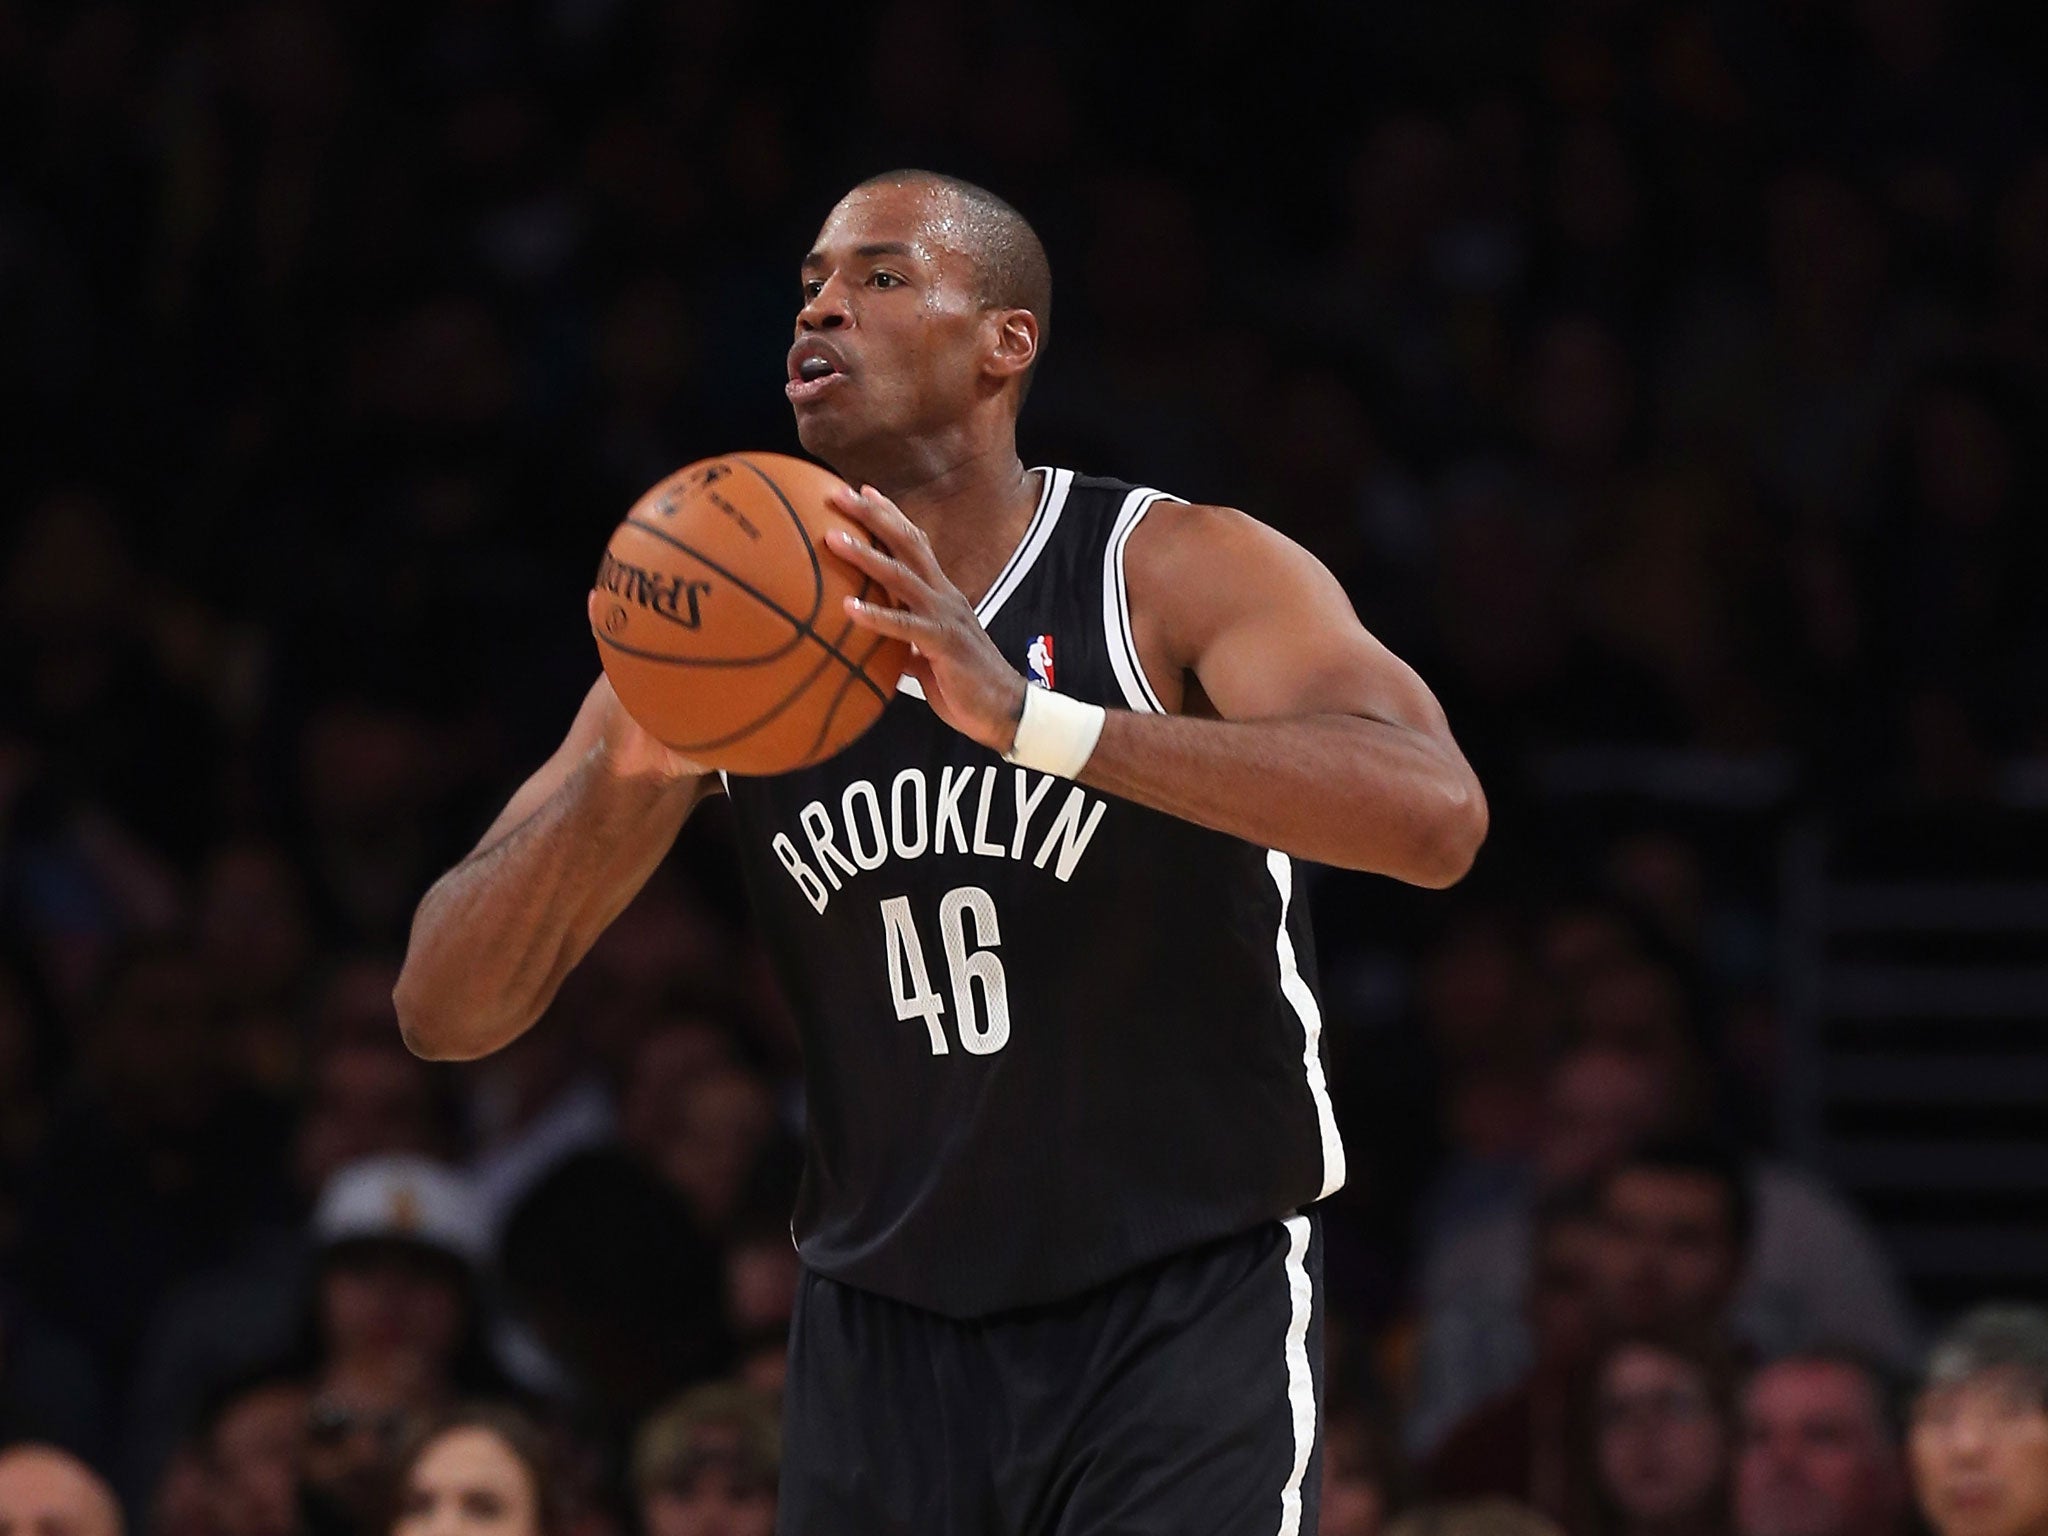 NBA's Jason Collins comes out as gay